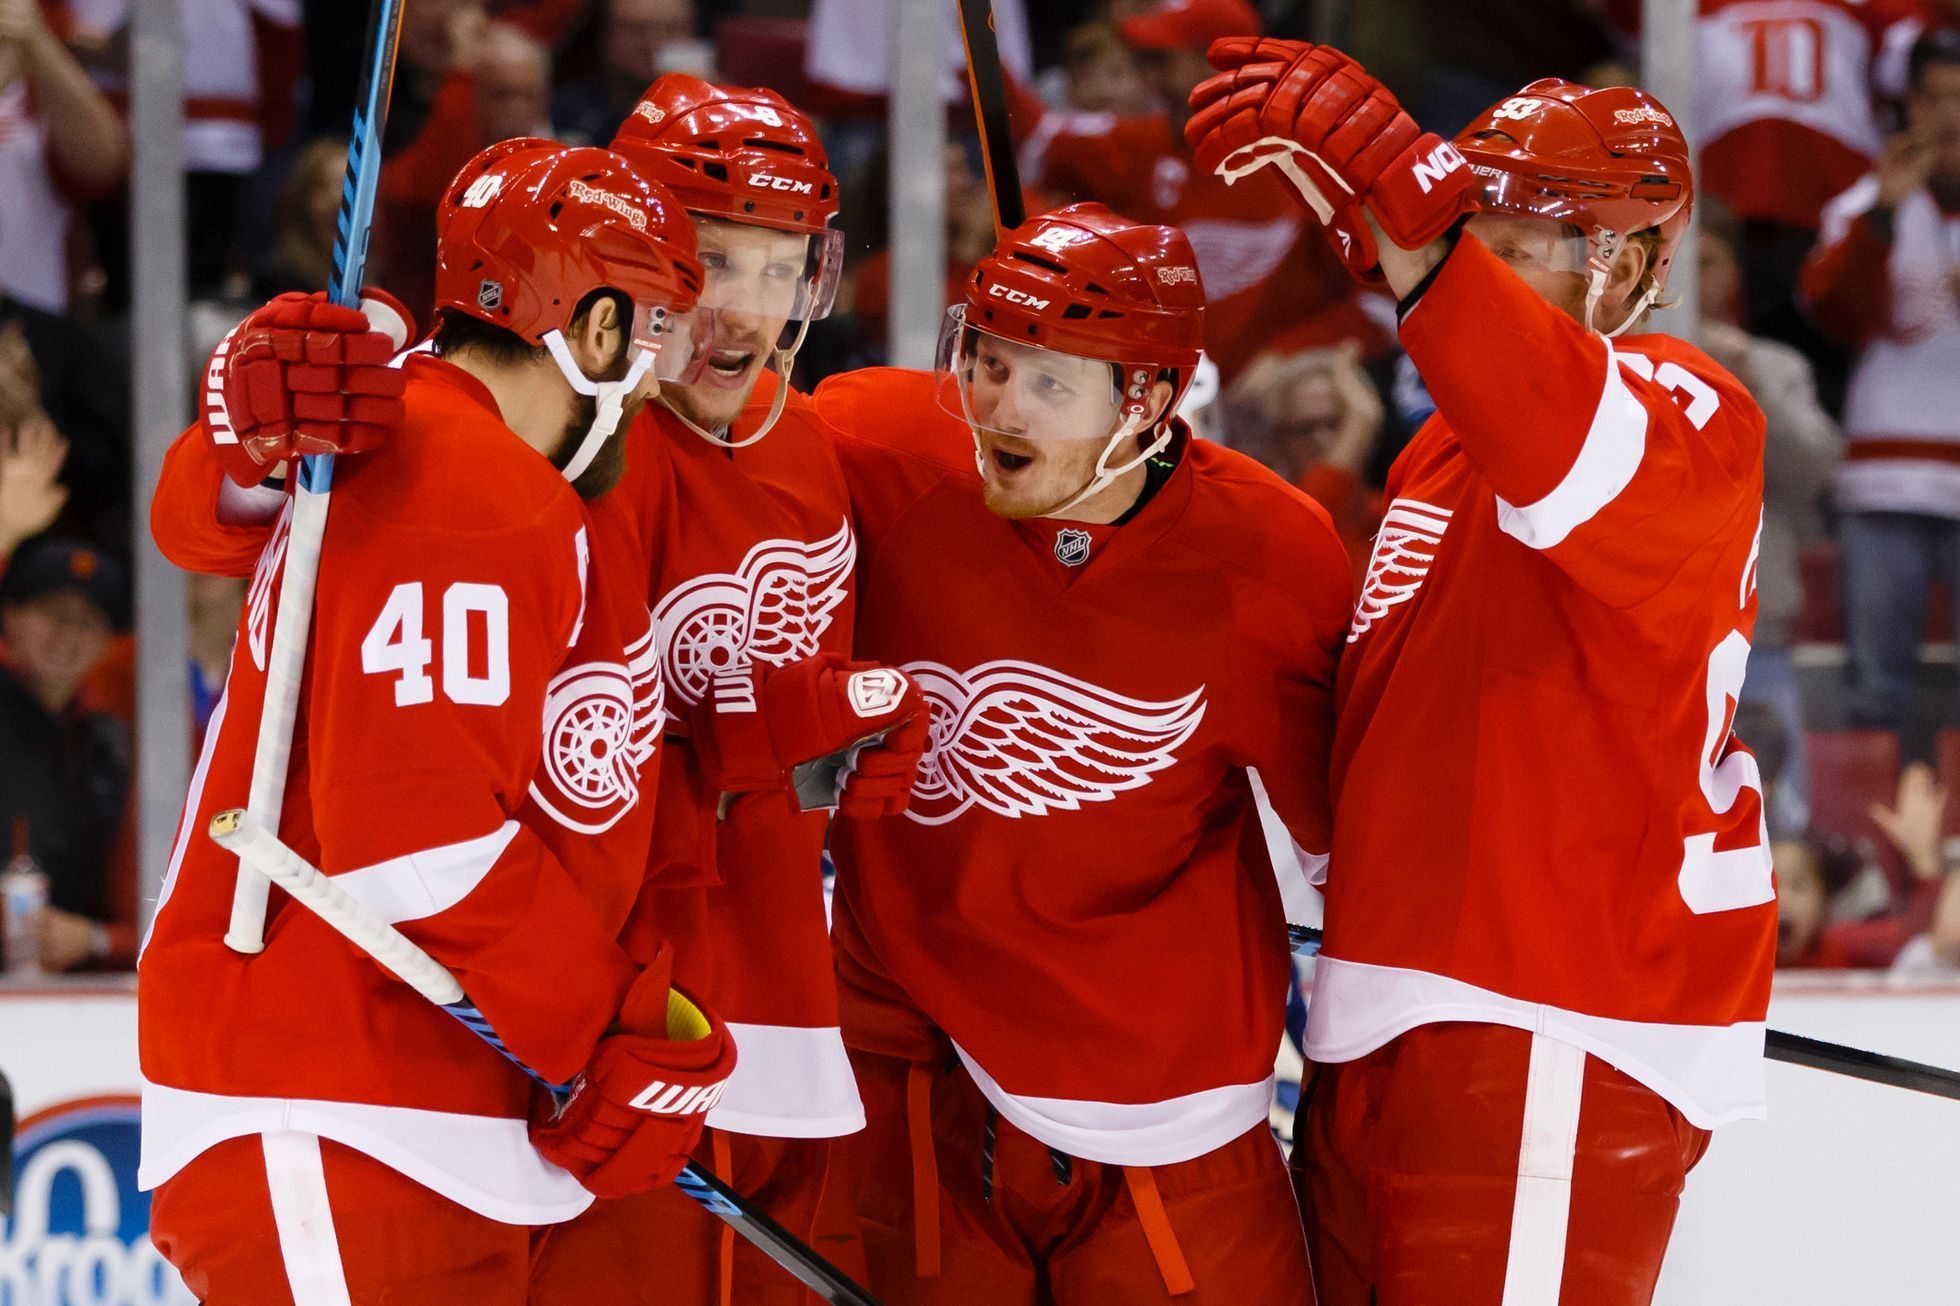 NHL: Vancouver Canucks at Detroit Red Wings (Nyquist)